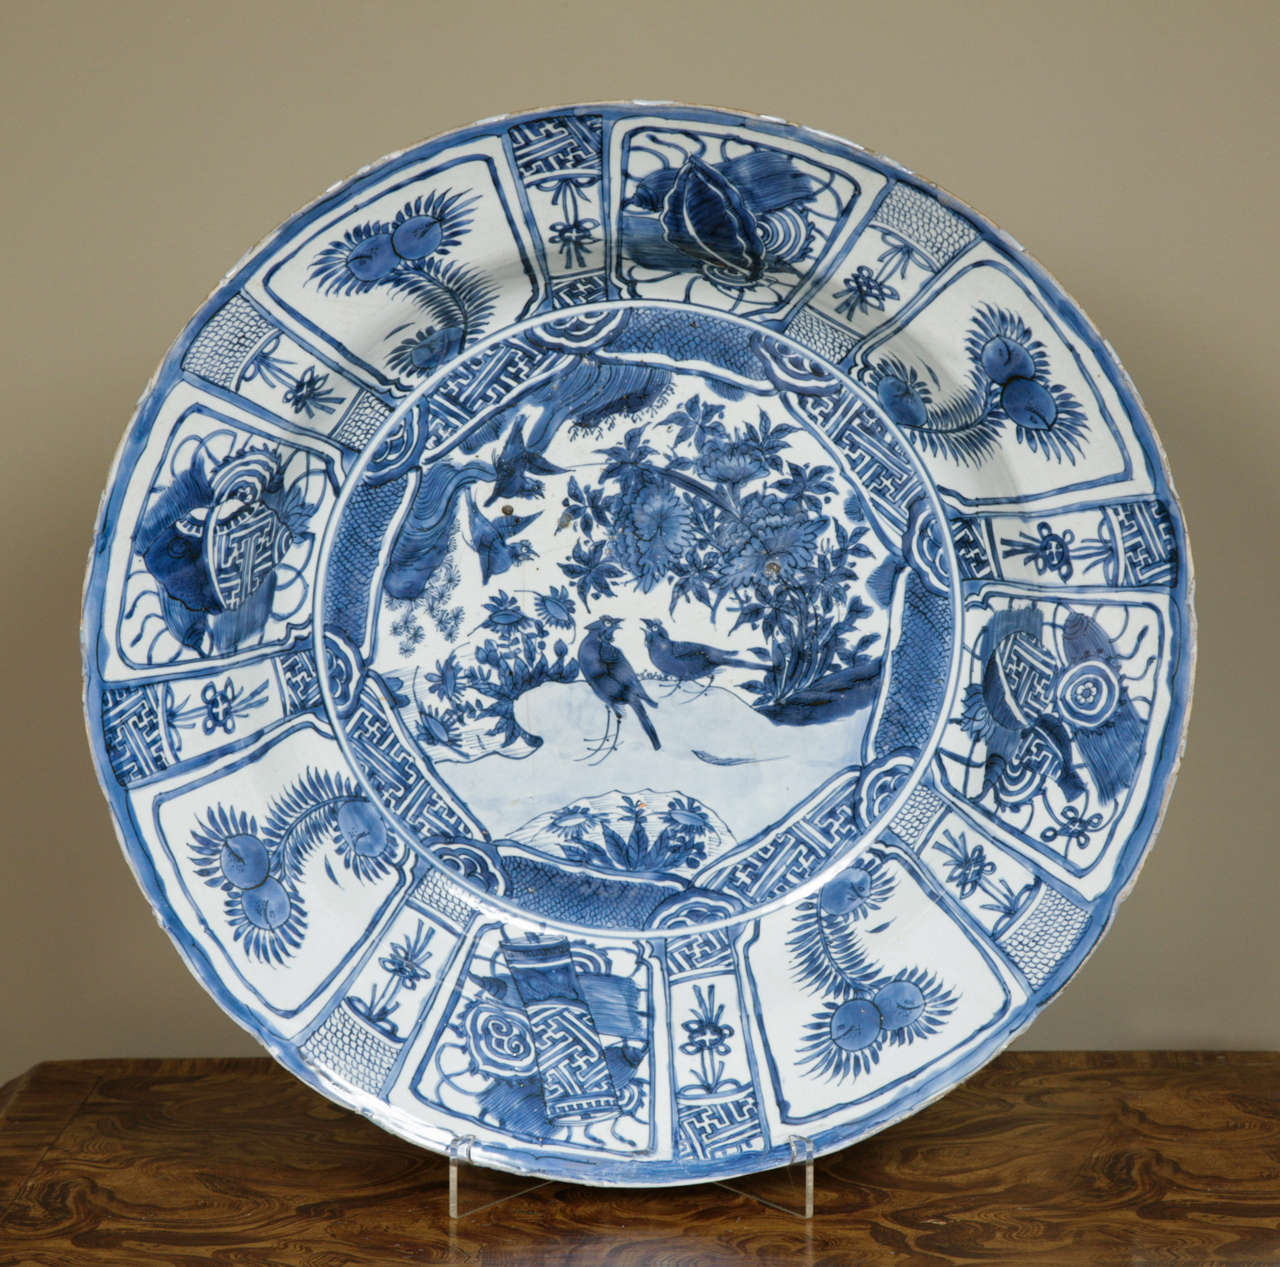 A large Chinese blue and white kraak charger, Wanli (1573-1619), decorated in the centre with a pair of black birds and flowers issuing from rockwork. The panelled border decorated with flowers and precious objects. Good solid blue glaze. Condition: